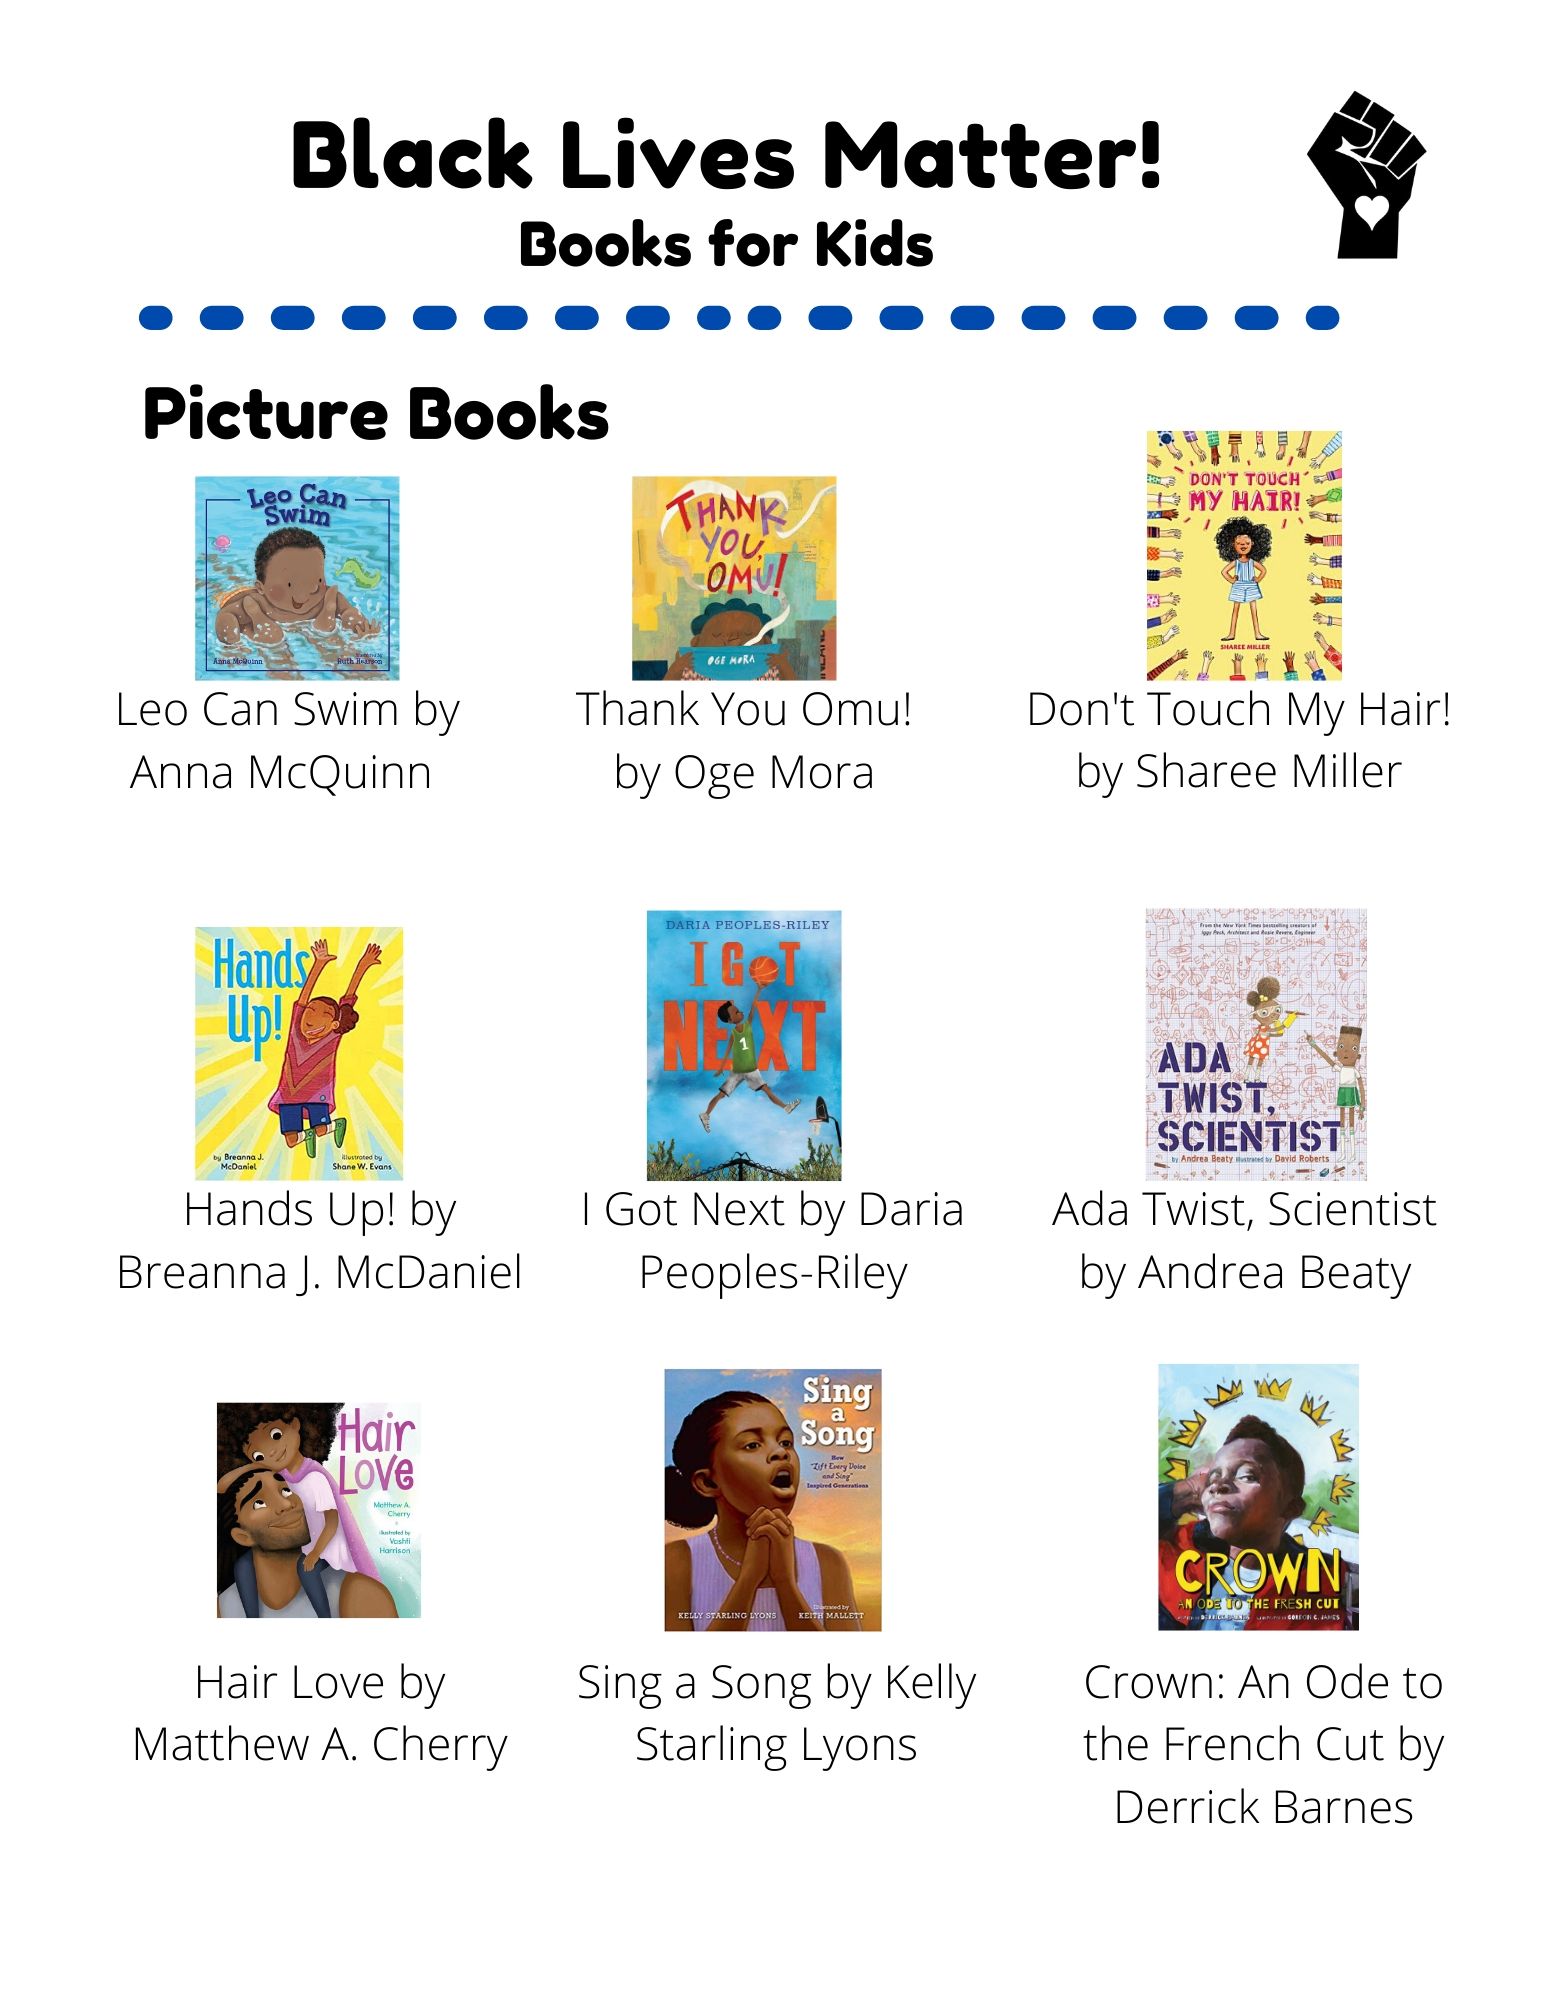 Black Lives Matter: Picture Books: Leo Can Swim by Anna McQuinn. Thank You Omu! by Oge Mora. Don't Touch My Hair!  by Sharee Miller. Hands Up! by Breanna J. McDaniel. I Got Next by Daria Peoples-Riley. Ada Twist, Scientist by Andrea Beaty. Hair Love by Matthew A. Cherry. Sing a Song by Kelly Starling Lyons. Crown: An Ode to the French Cut by Derrick Barnes. Chapter Books: A Good Kind of Trouble by Lisa Moore Ramee. Harbor Me by Jacqueline Woodson. Ghost by Jason Reynolds. The Parker Inheritance by Varian Johnson. The Underground Abductor by Nathan Hale. The Season of Styx Malone  by Kekla Magoon. Non-Fiction: Marley Dias Gets it Done by Marley Dias. Hidden Figures by Margot Lee Shetterly. Exceptional Men in Black History by Vashti Harrison.